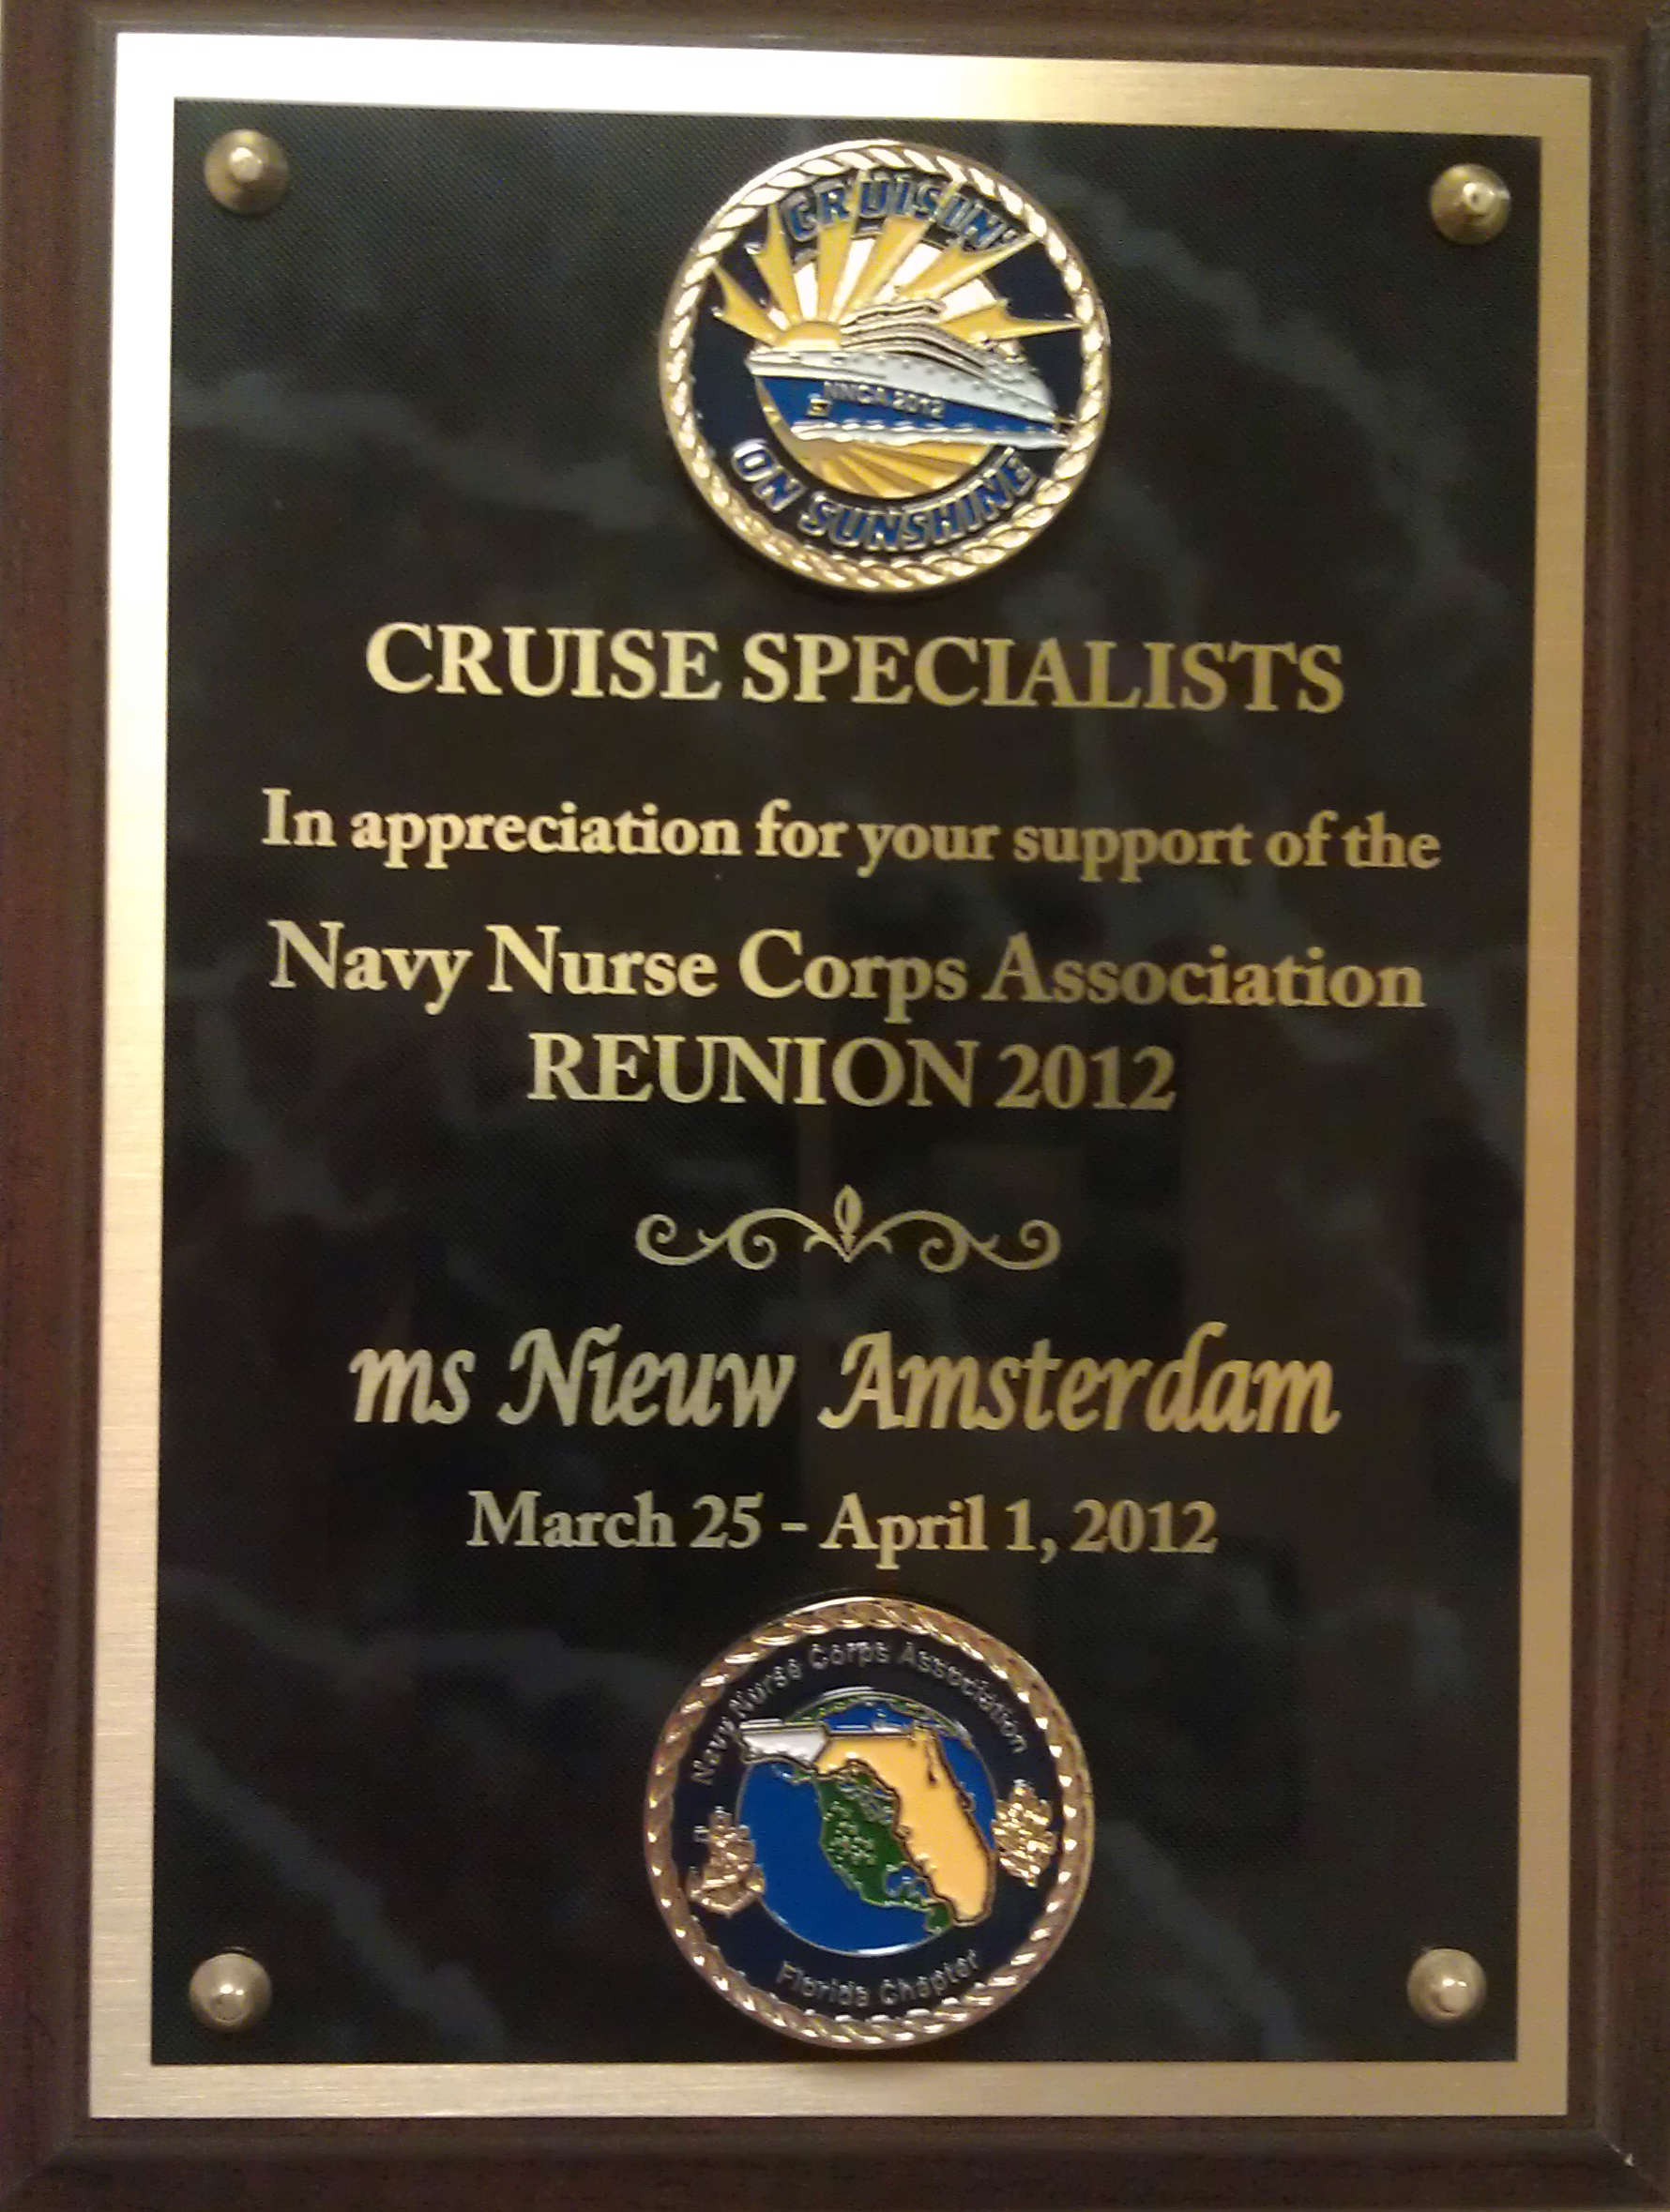 Plaque thanking Cruise Specialists team